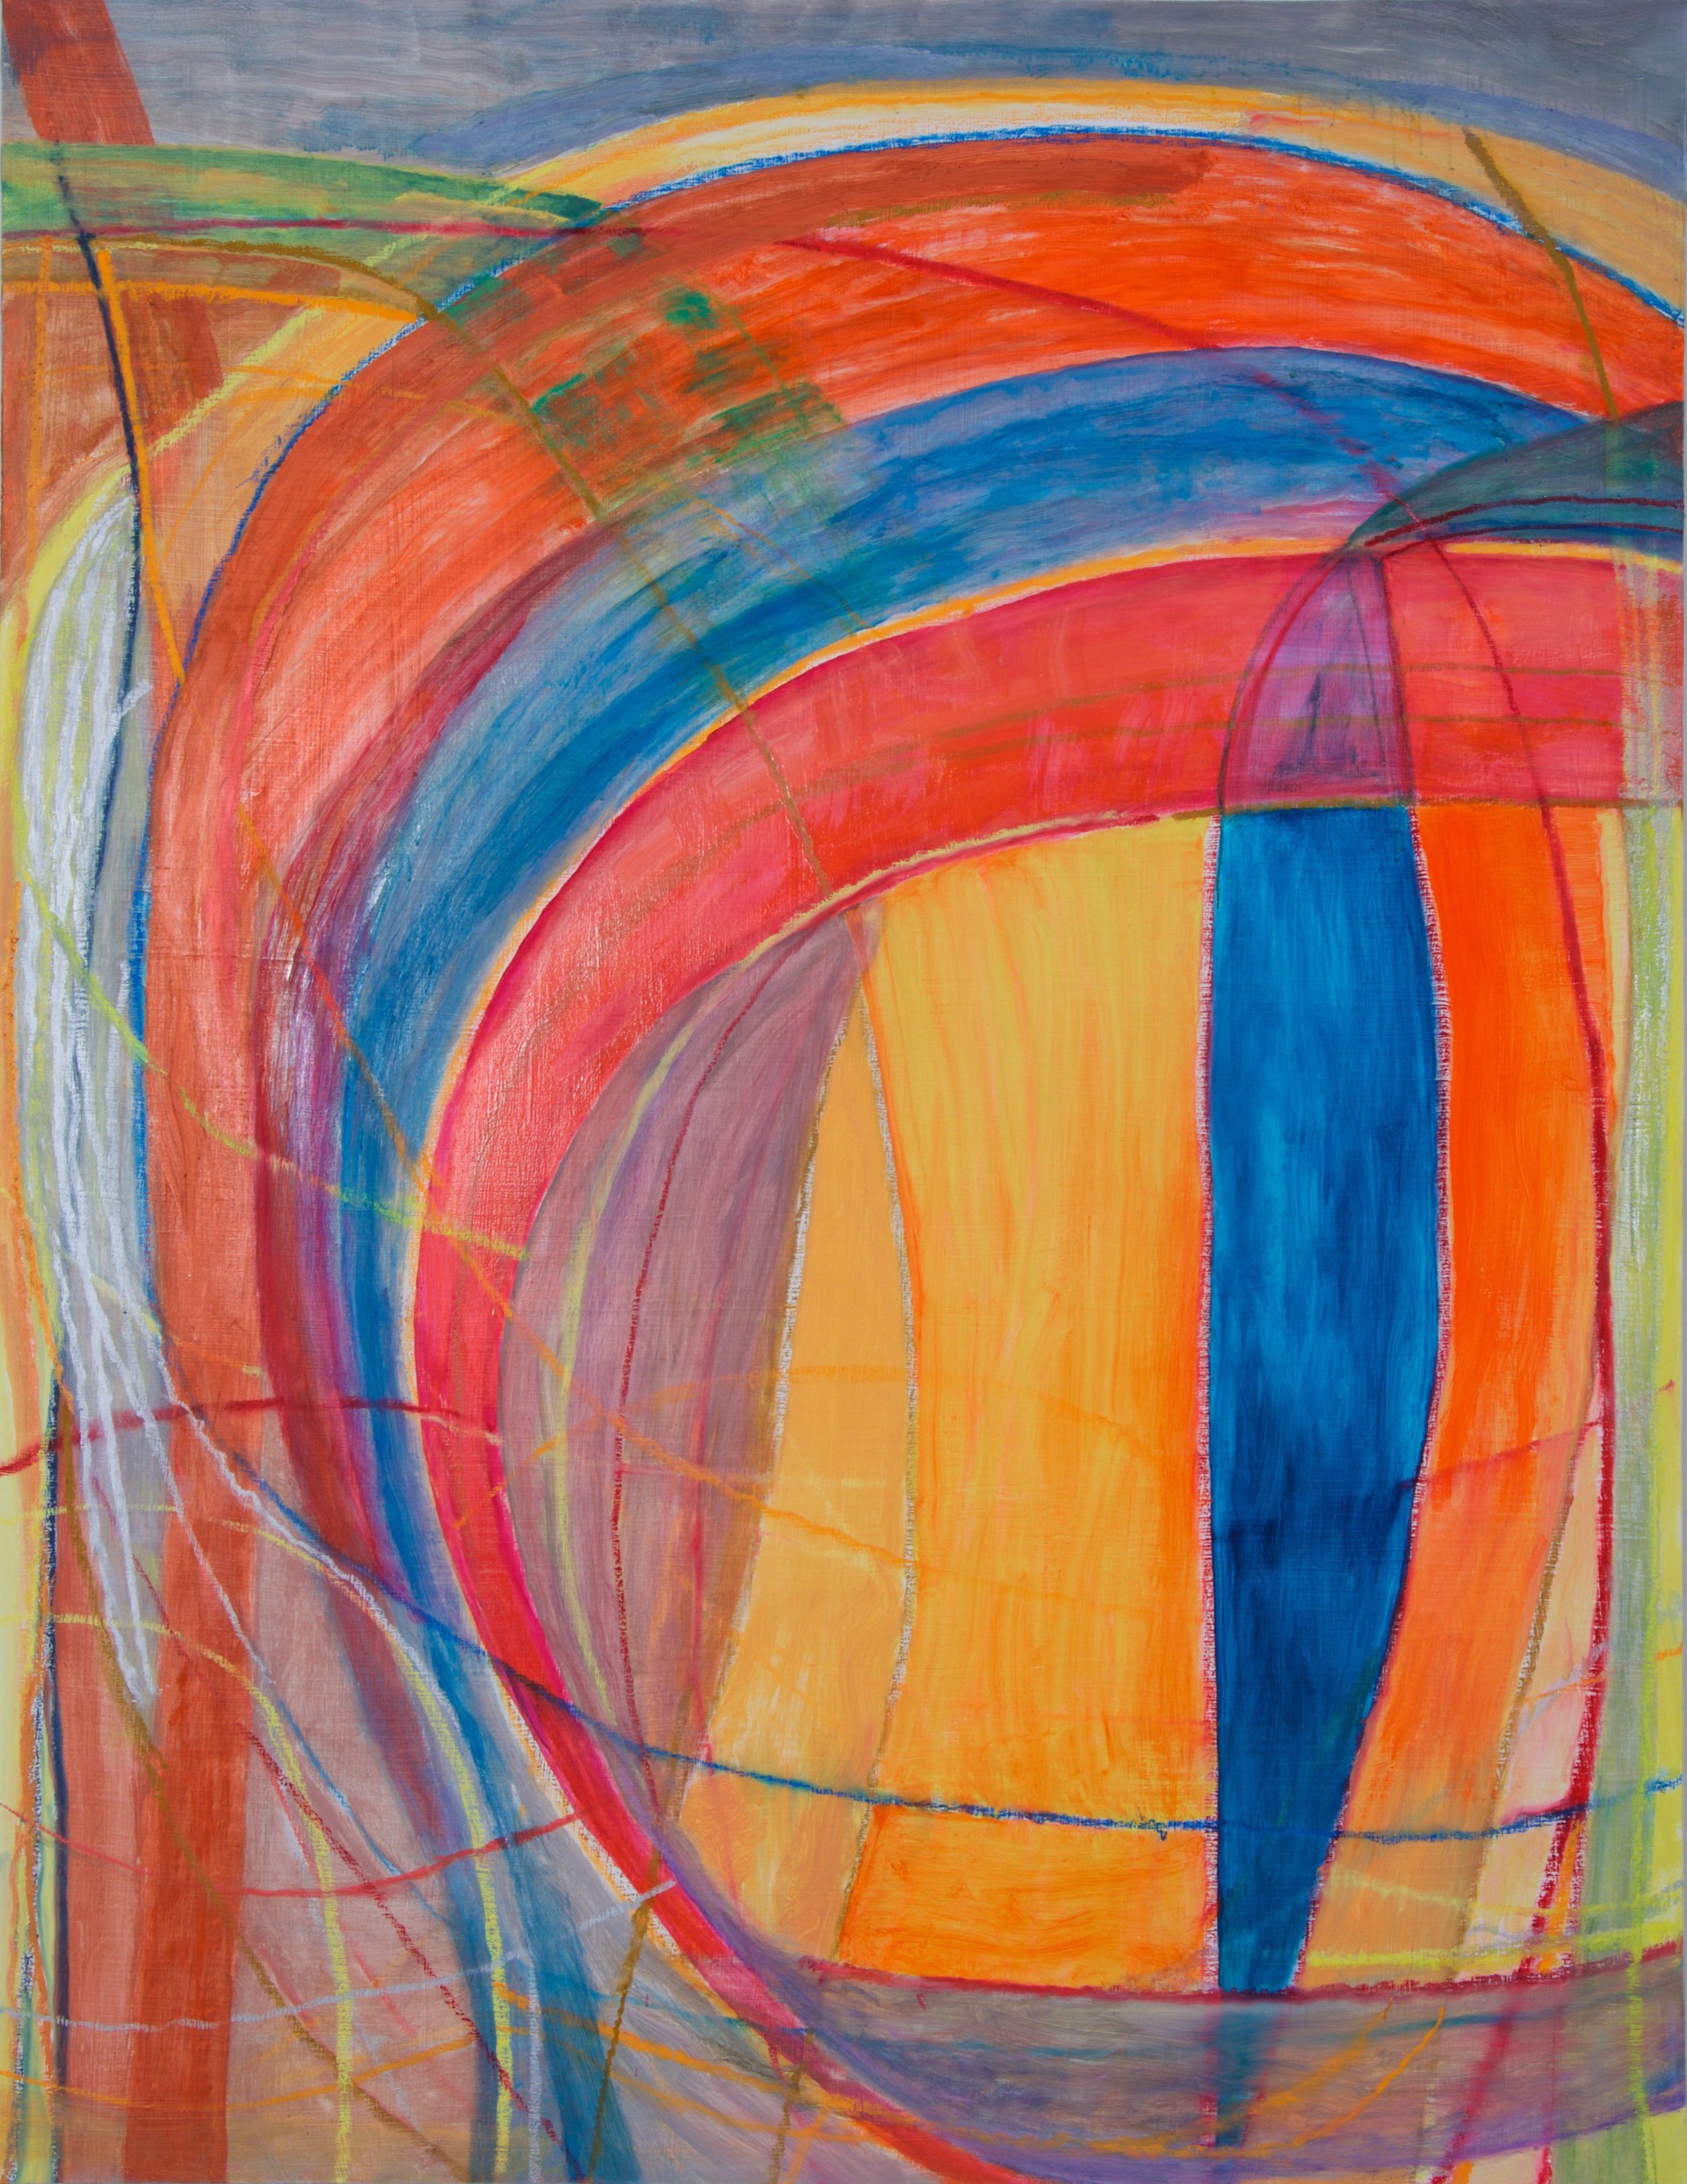 Colorsphere 1 (Yellow Orange) by Susan Moss